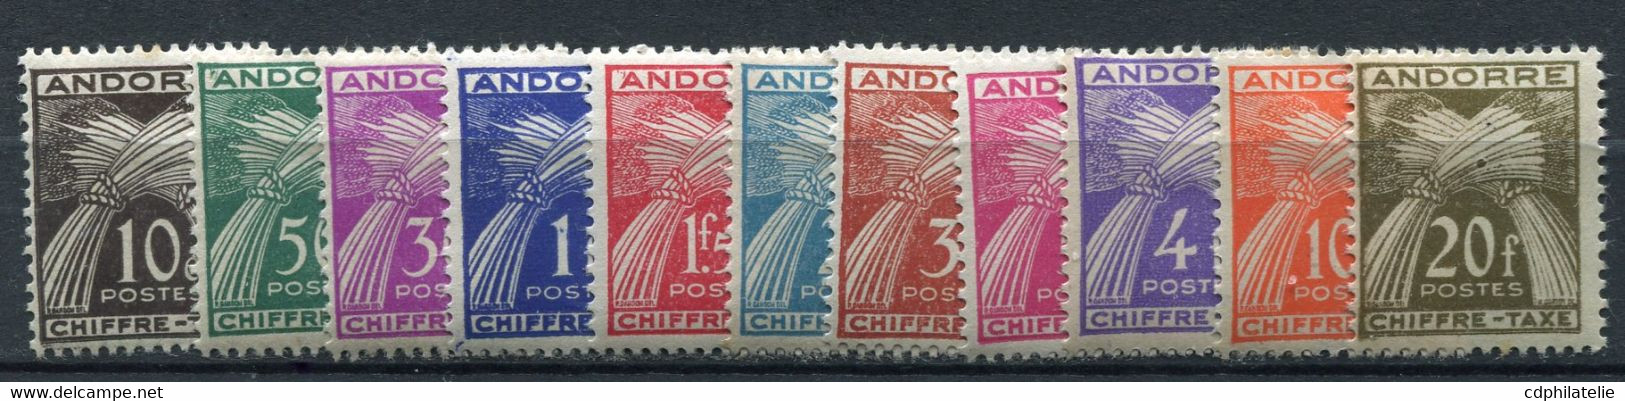 ANDORRE FRANCAIS TIMBRES-TAXE N°21 / 31 * - Ungebraucht